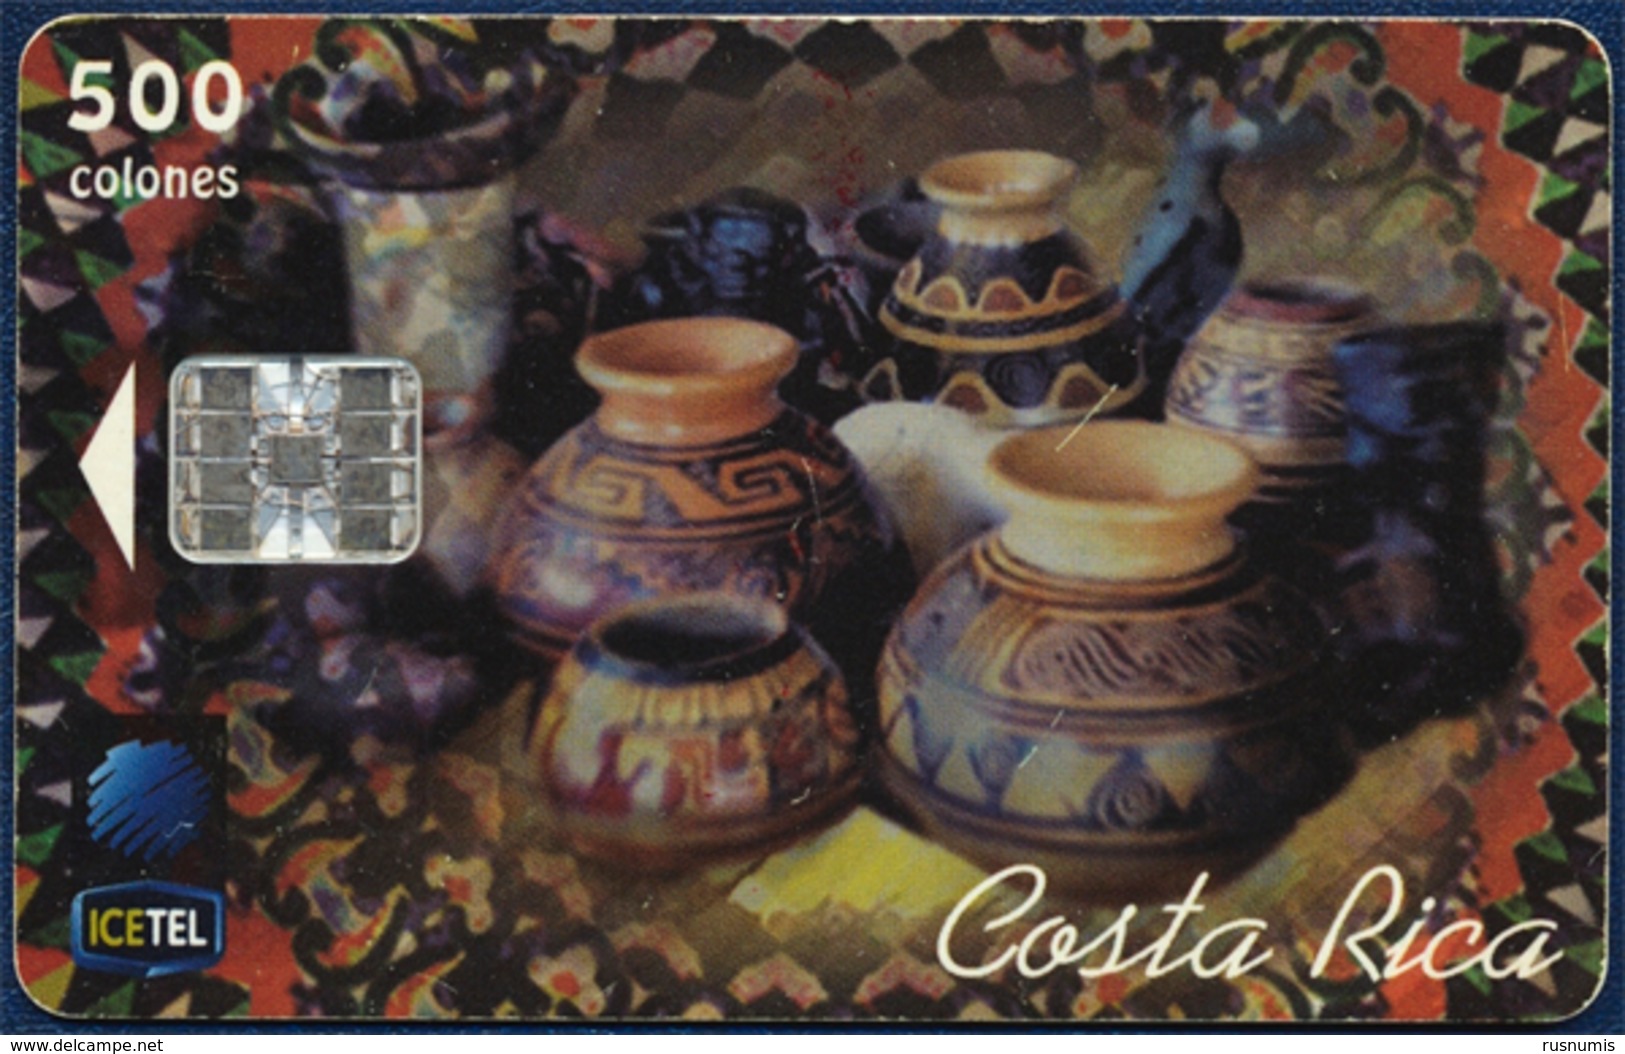 COSTA RICA ICETEL 500 COLONES UNITS CHIP PHONECARD TELECARTE TRADITIONAL HANDYCRAFT POTTERY GOOD USED - Costa Rica